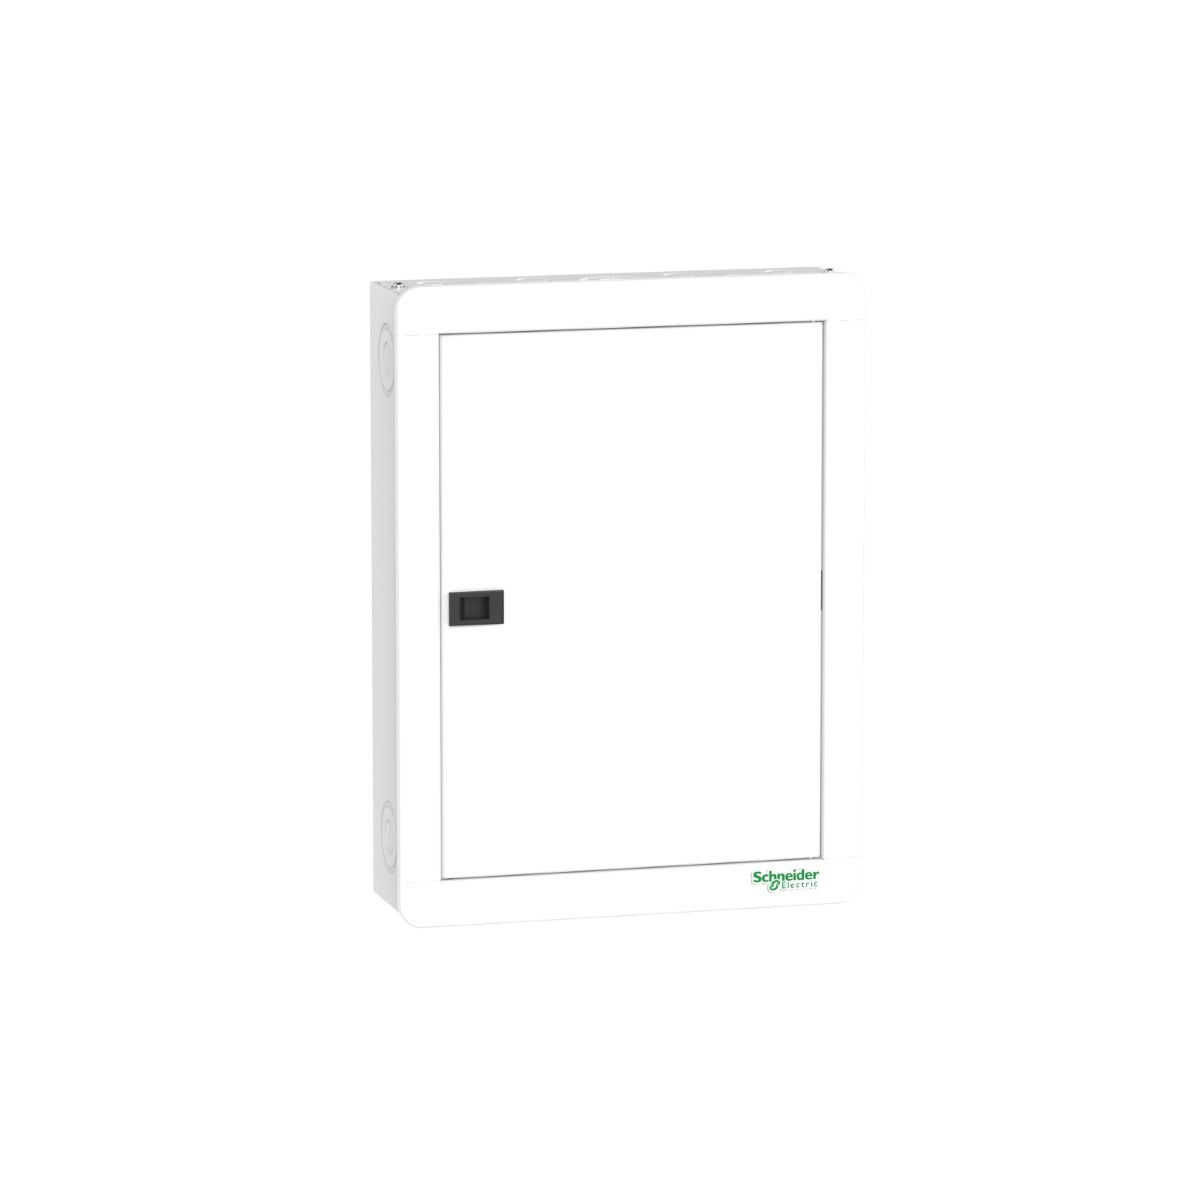 Distribution board, Acti9 Disbo, 32 ways, 125A, 2 row, surface mount